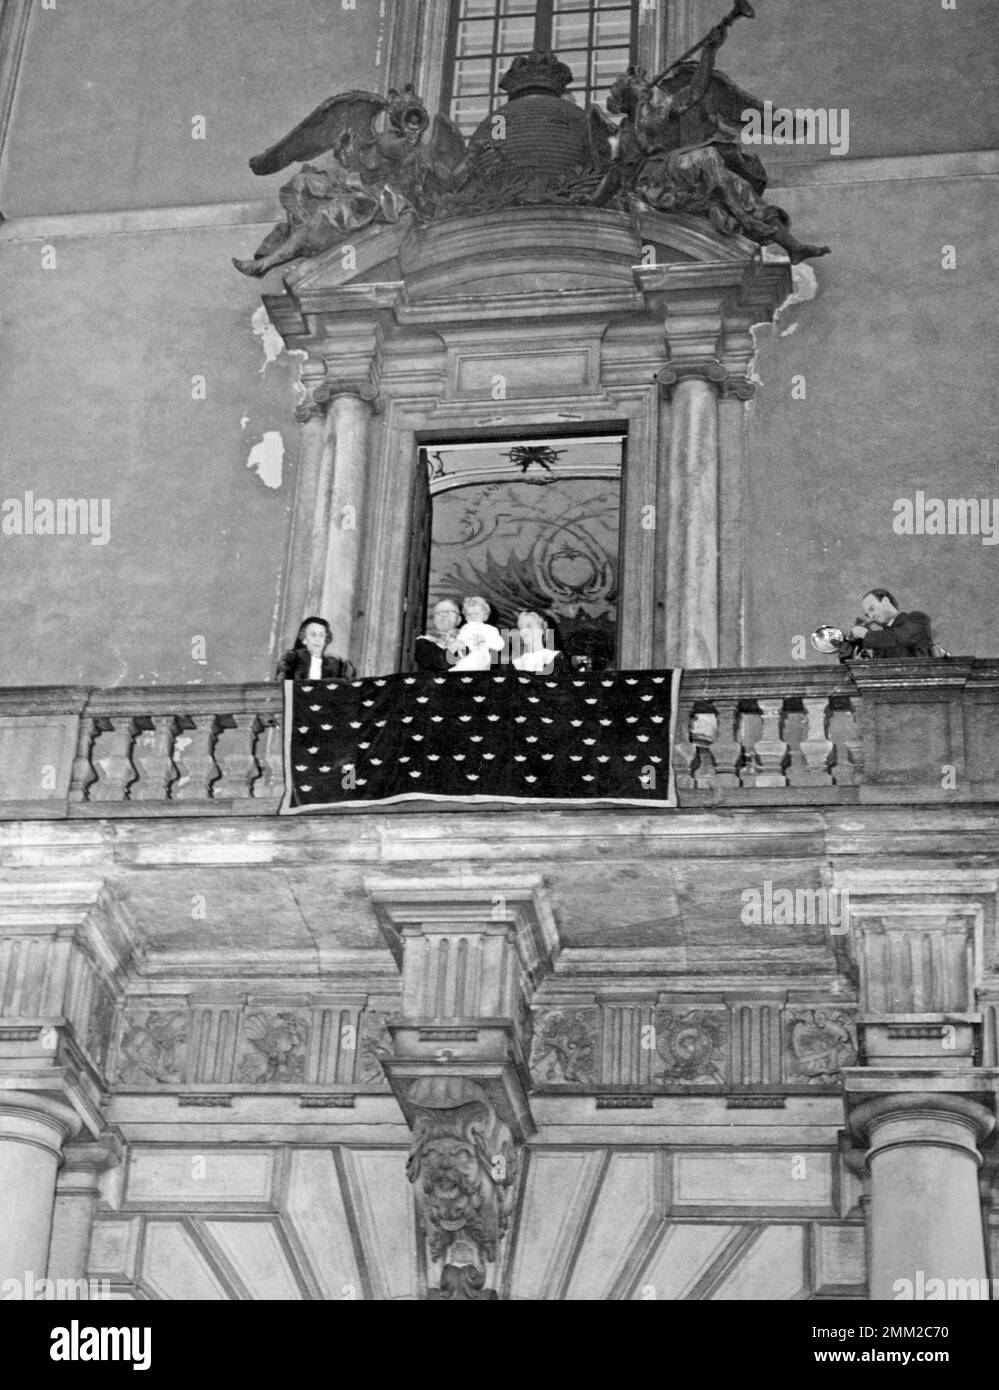 King Gustaf VI Adolf at the time of him succeeds his father Gustav V on the throne. Pictured on the balcony of the royal castle in Stockholm together with Princess Sibylla and crown prince Carl XVI Gustaf and Queen Louise. 30 october 1950. Stock Photo